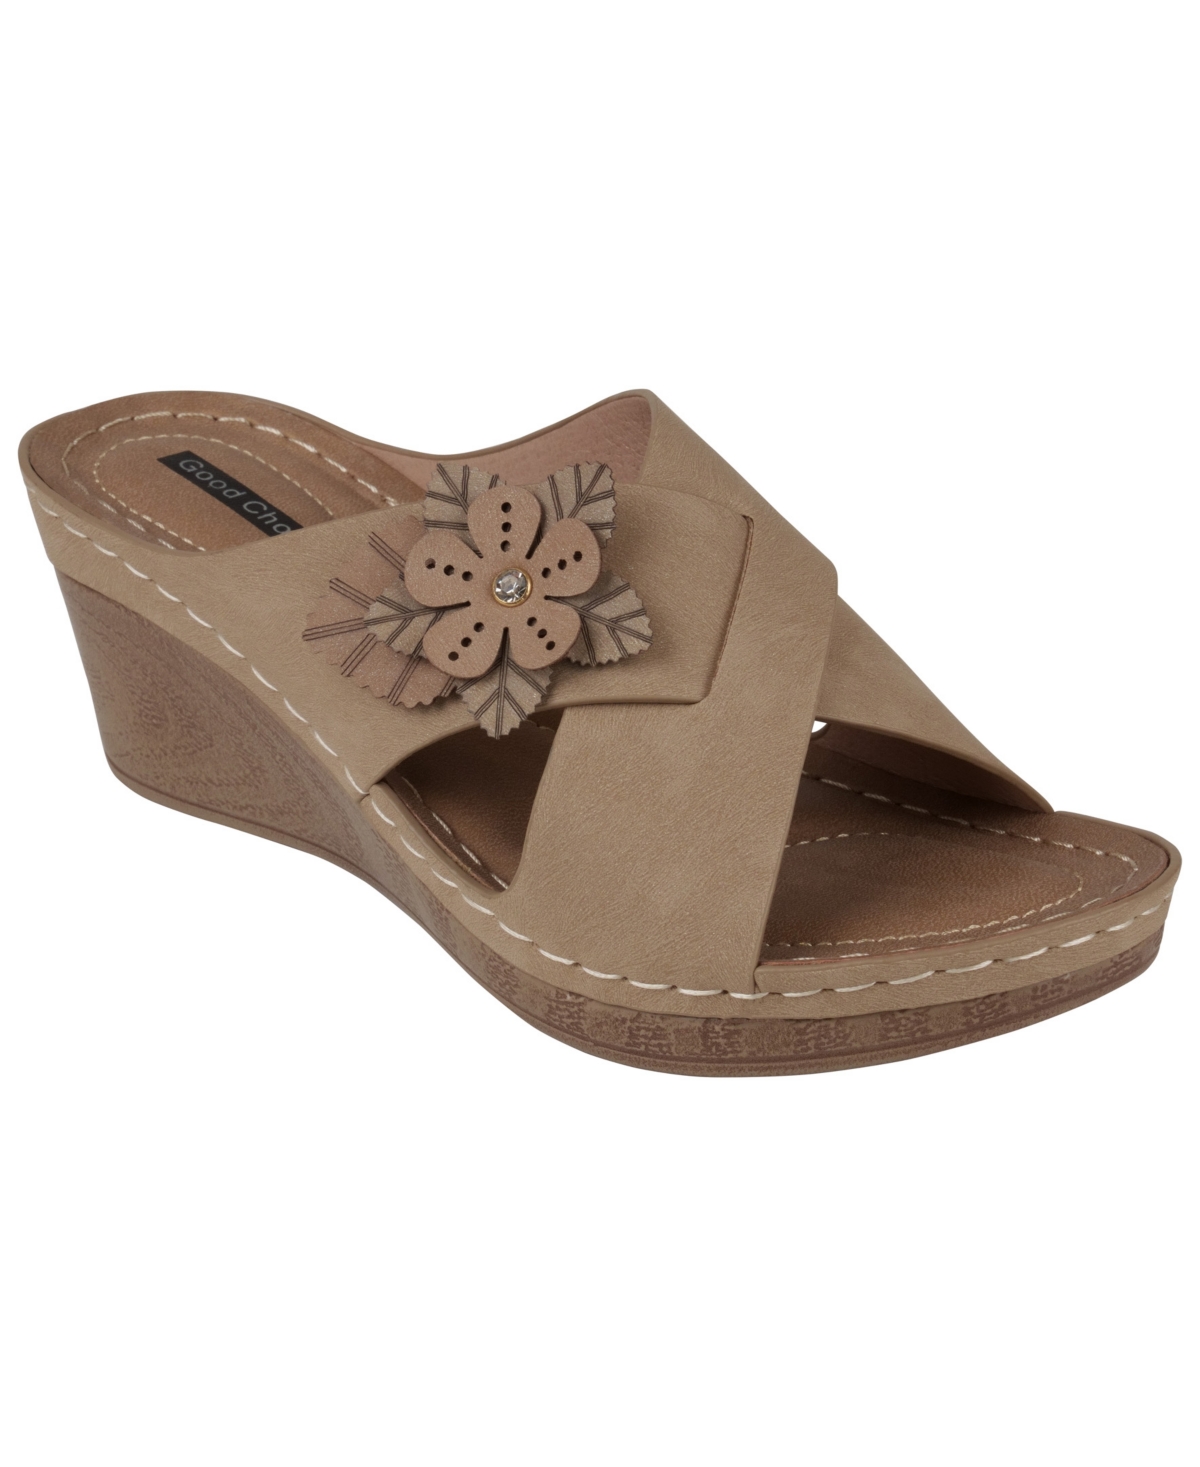 Women's Selly Flower Wedge Sandals - Lilac